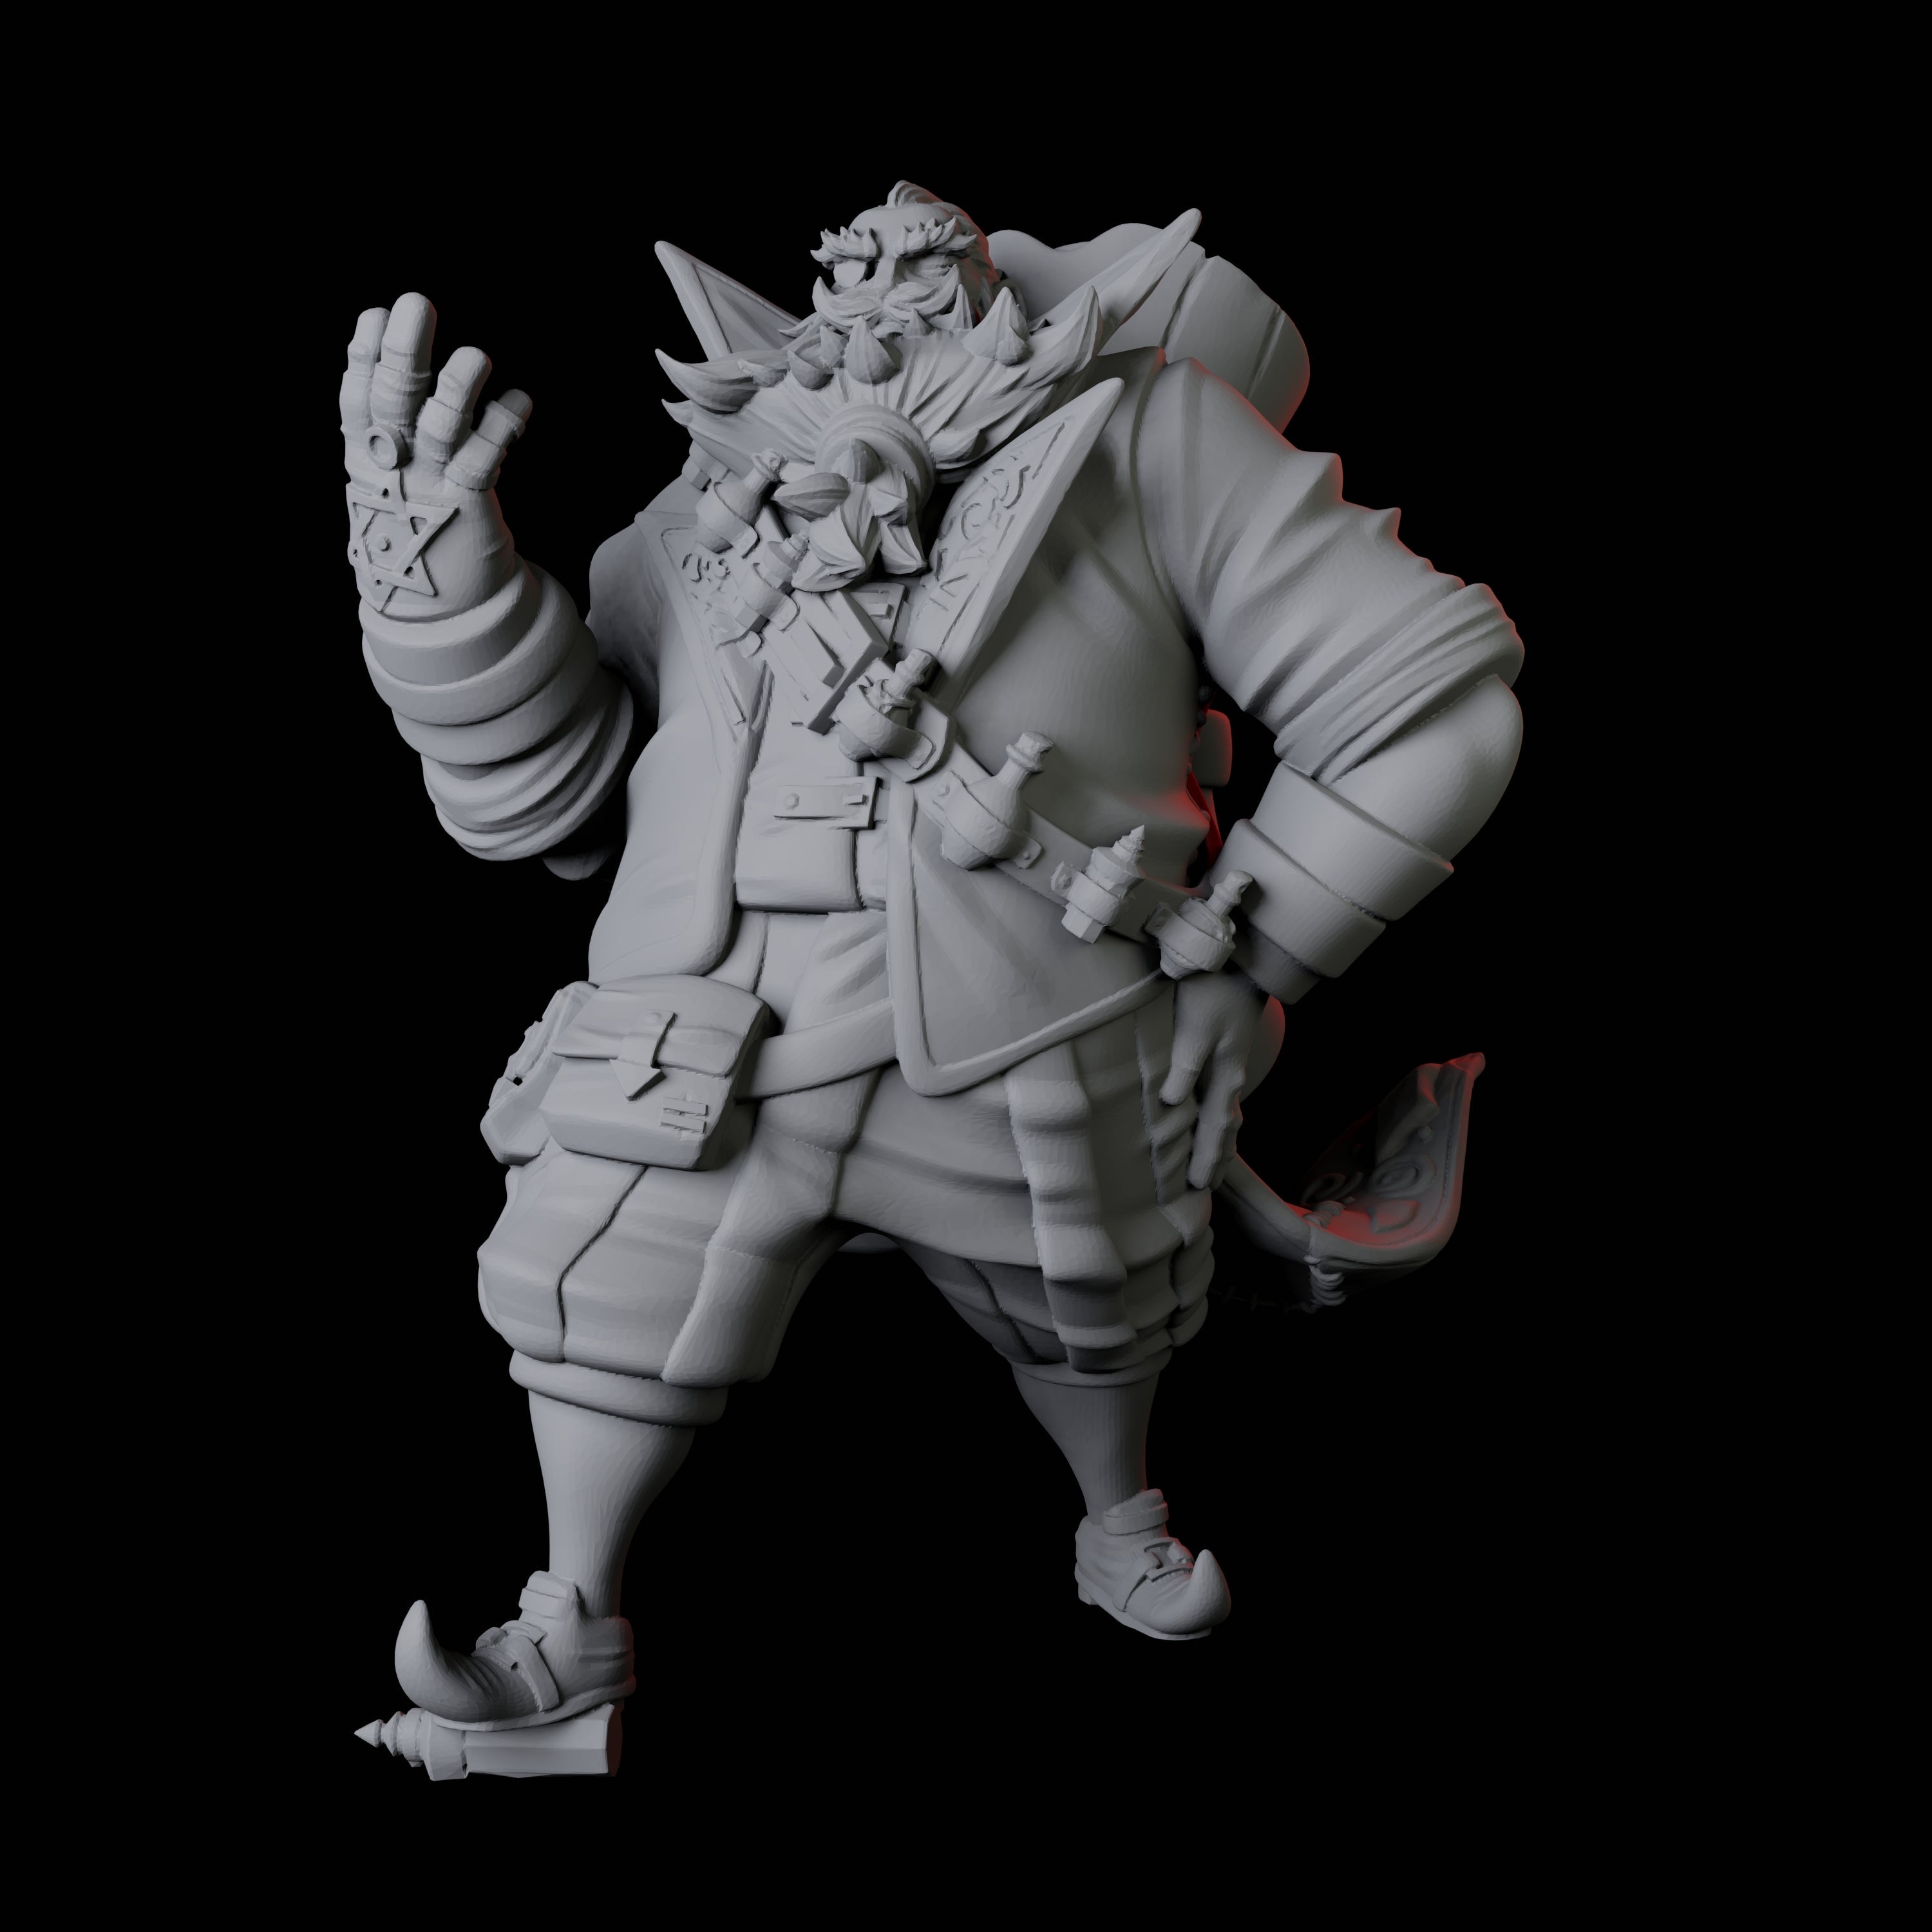 Portly Alchemist A Miniature for Dungeons and Dragons, Pathfinder or other TTRPGs